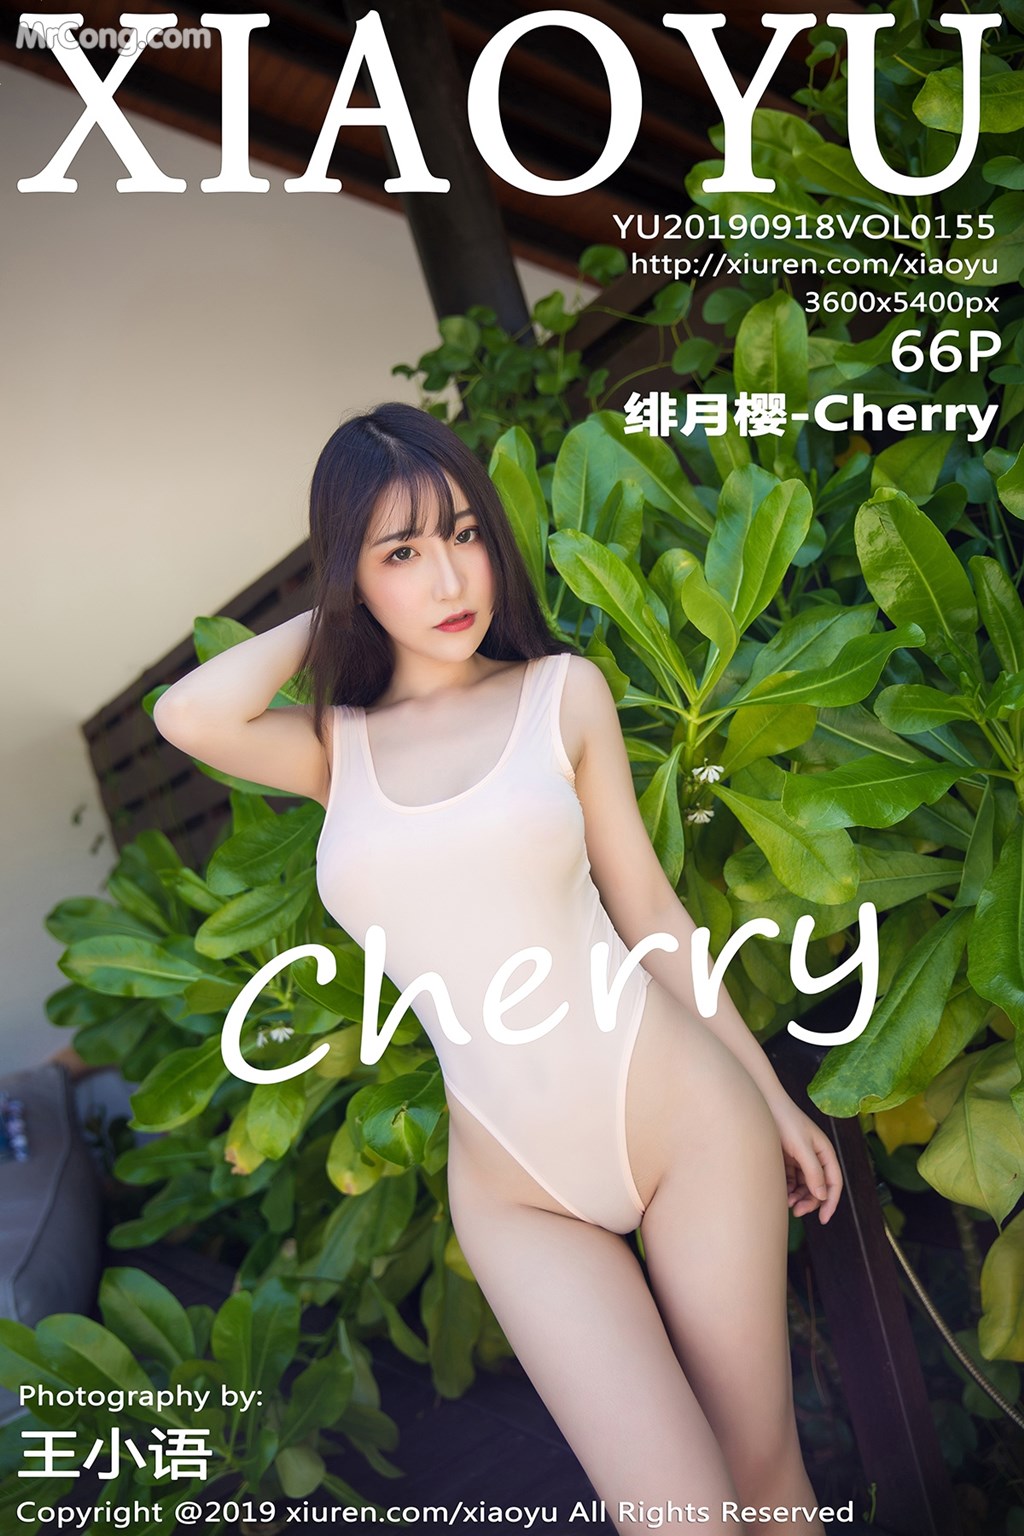 XiaoYu Vol.155: 绯 月樱 -Cherry (67 pictures)